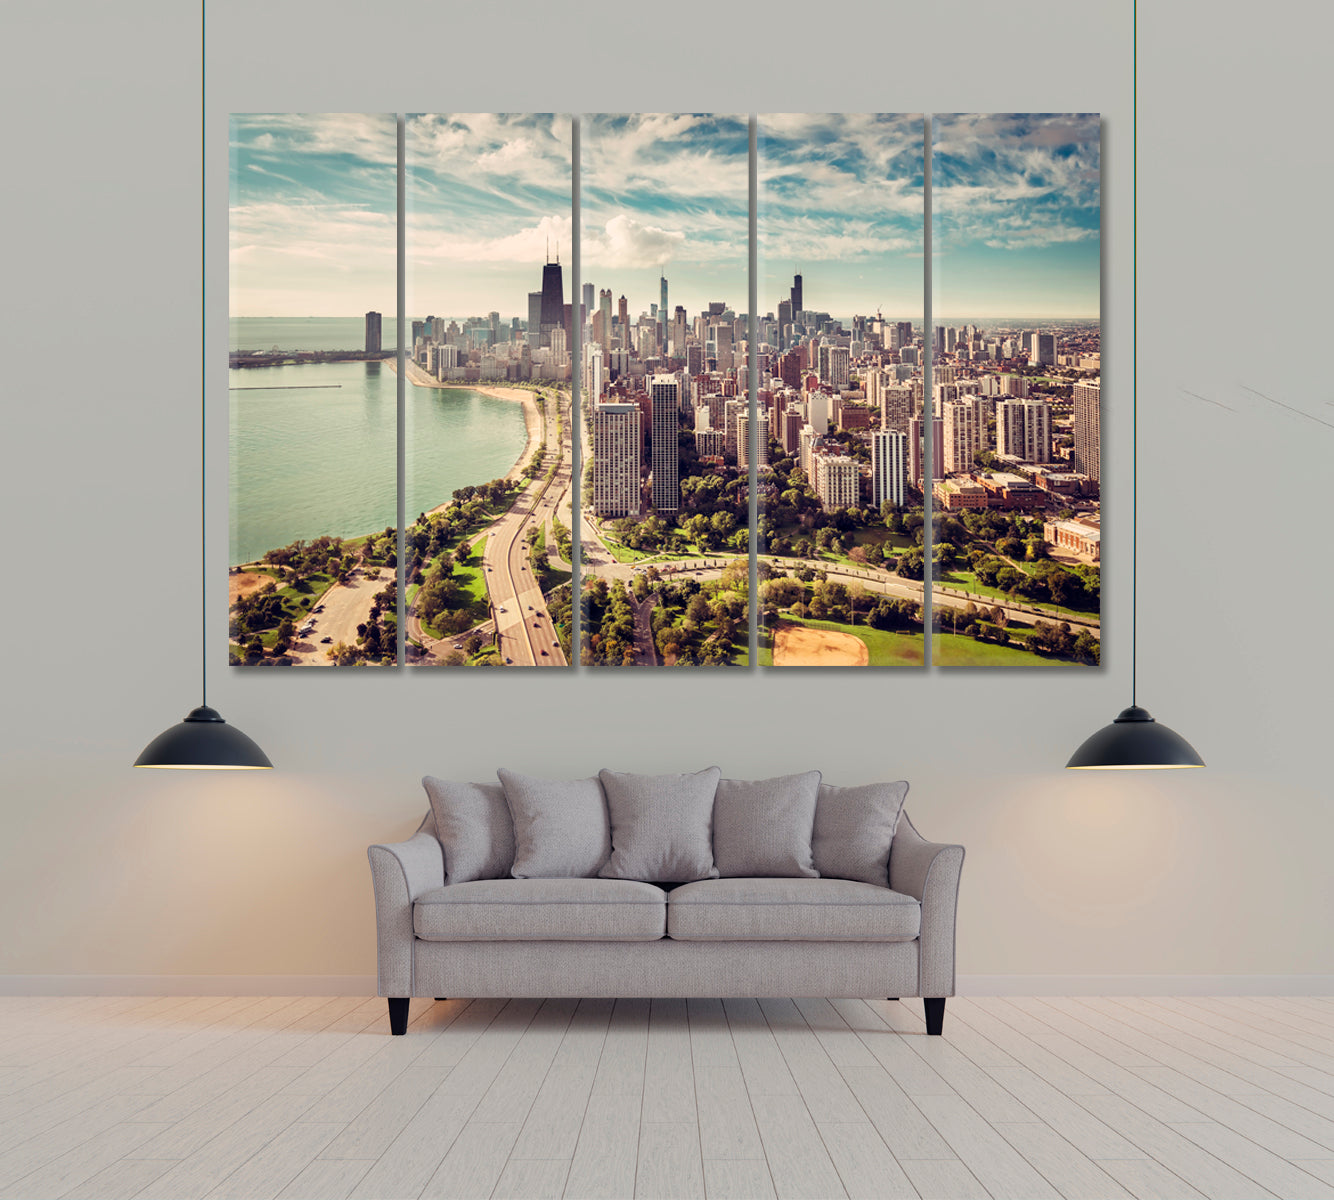 Chicago Skyline with Road by the Beach Canvas Print ArtLexy 5 Panels 36"x24" inches 